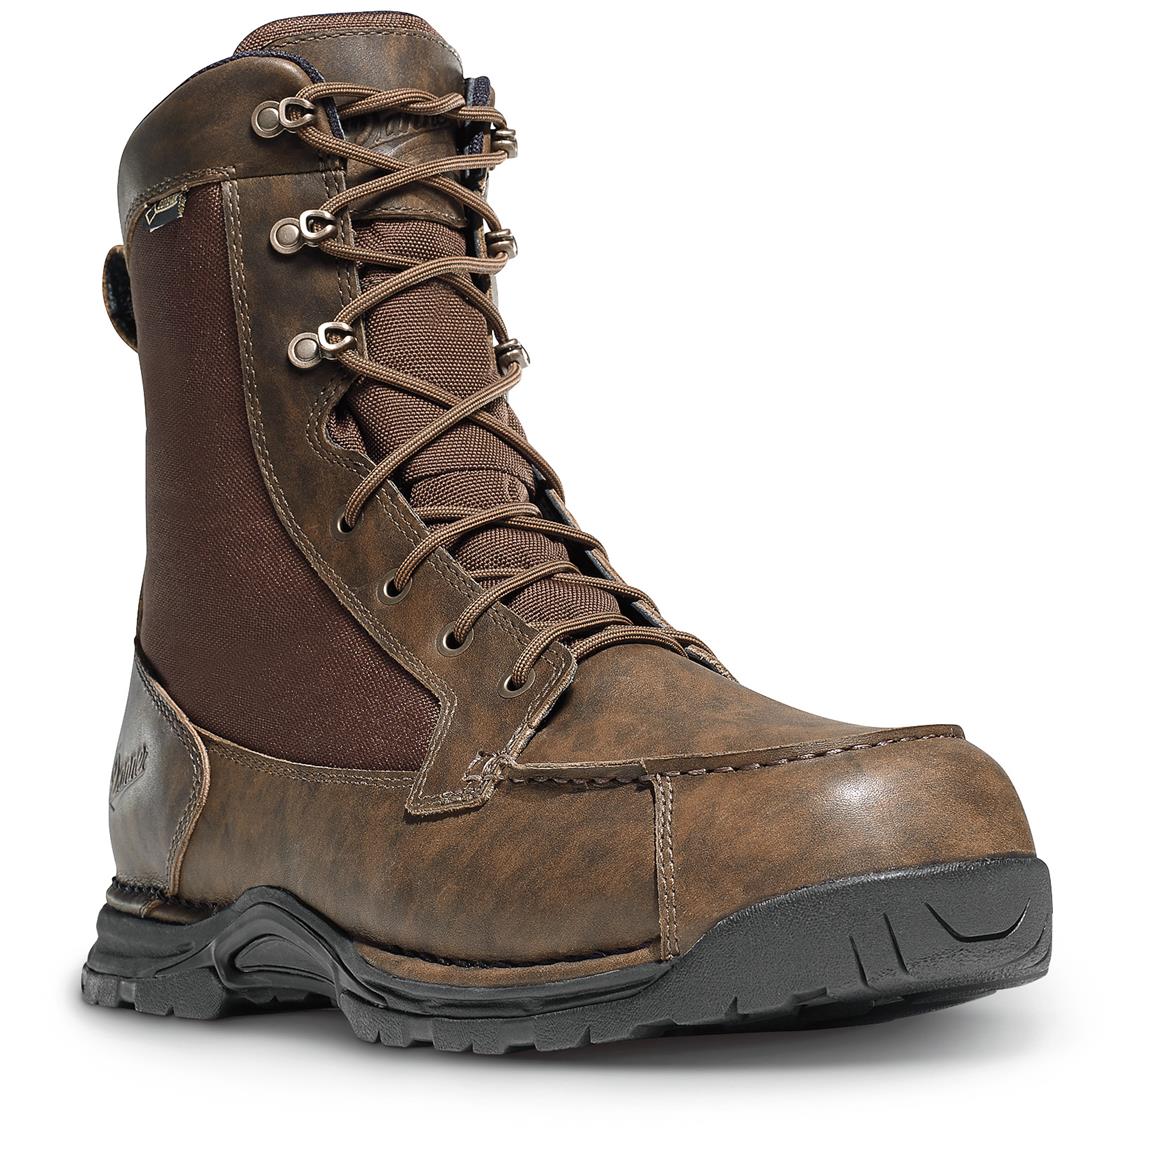 Danner Men's Sharptail 8" Hunting Boots - 669588, Hunting Boots at